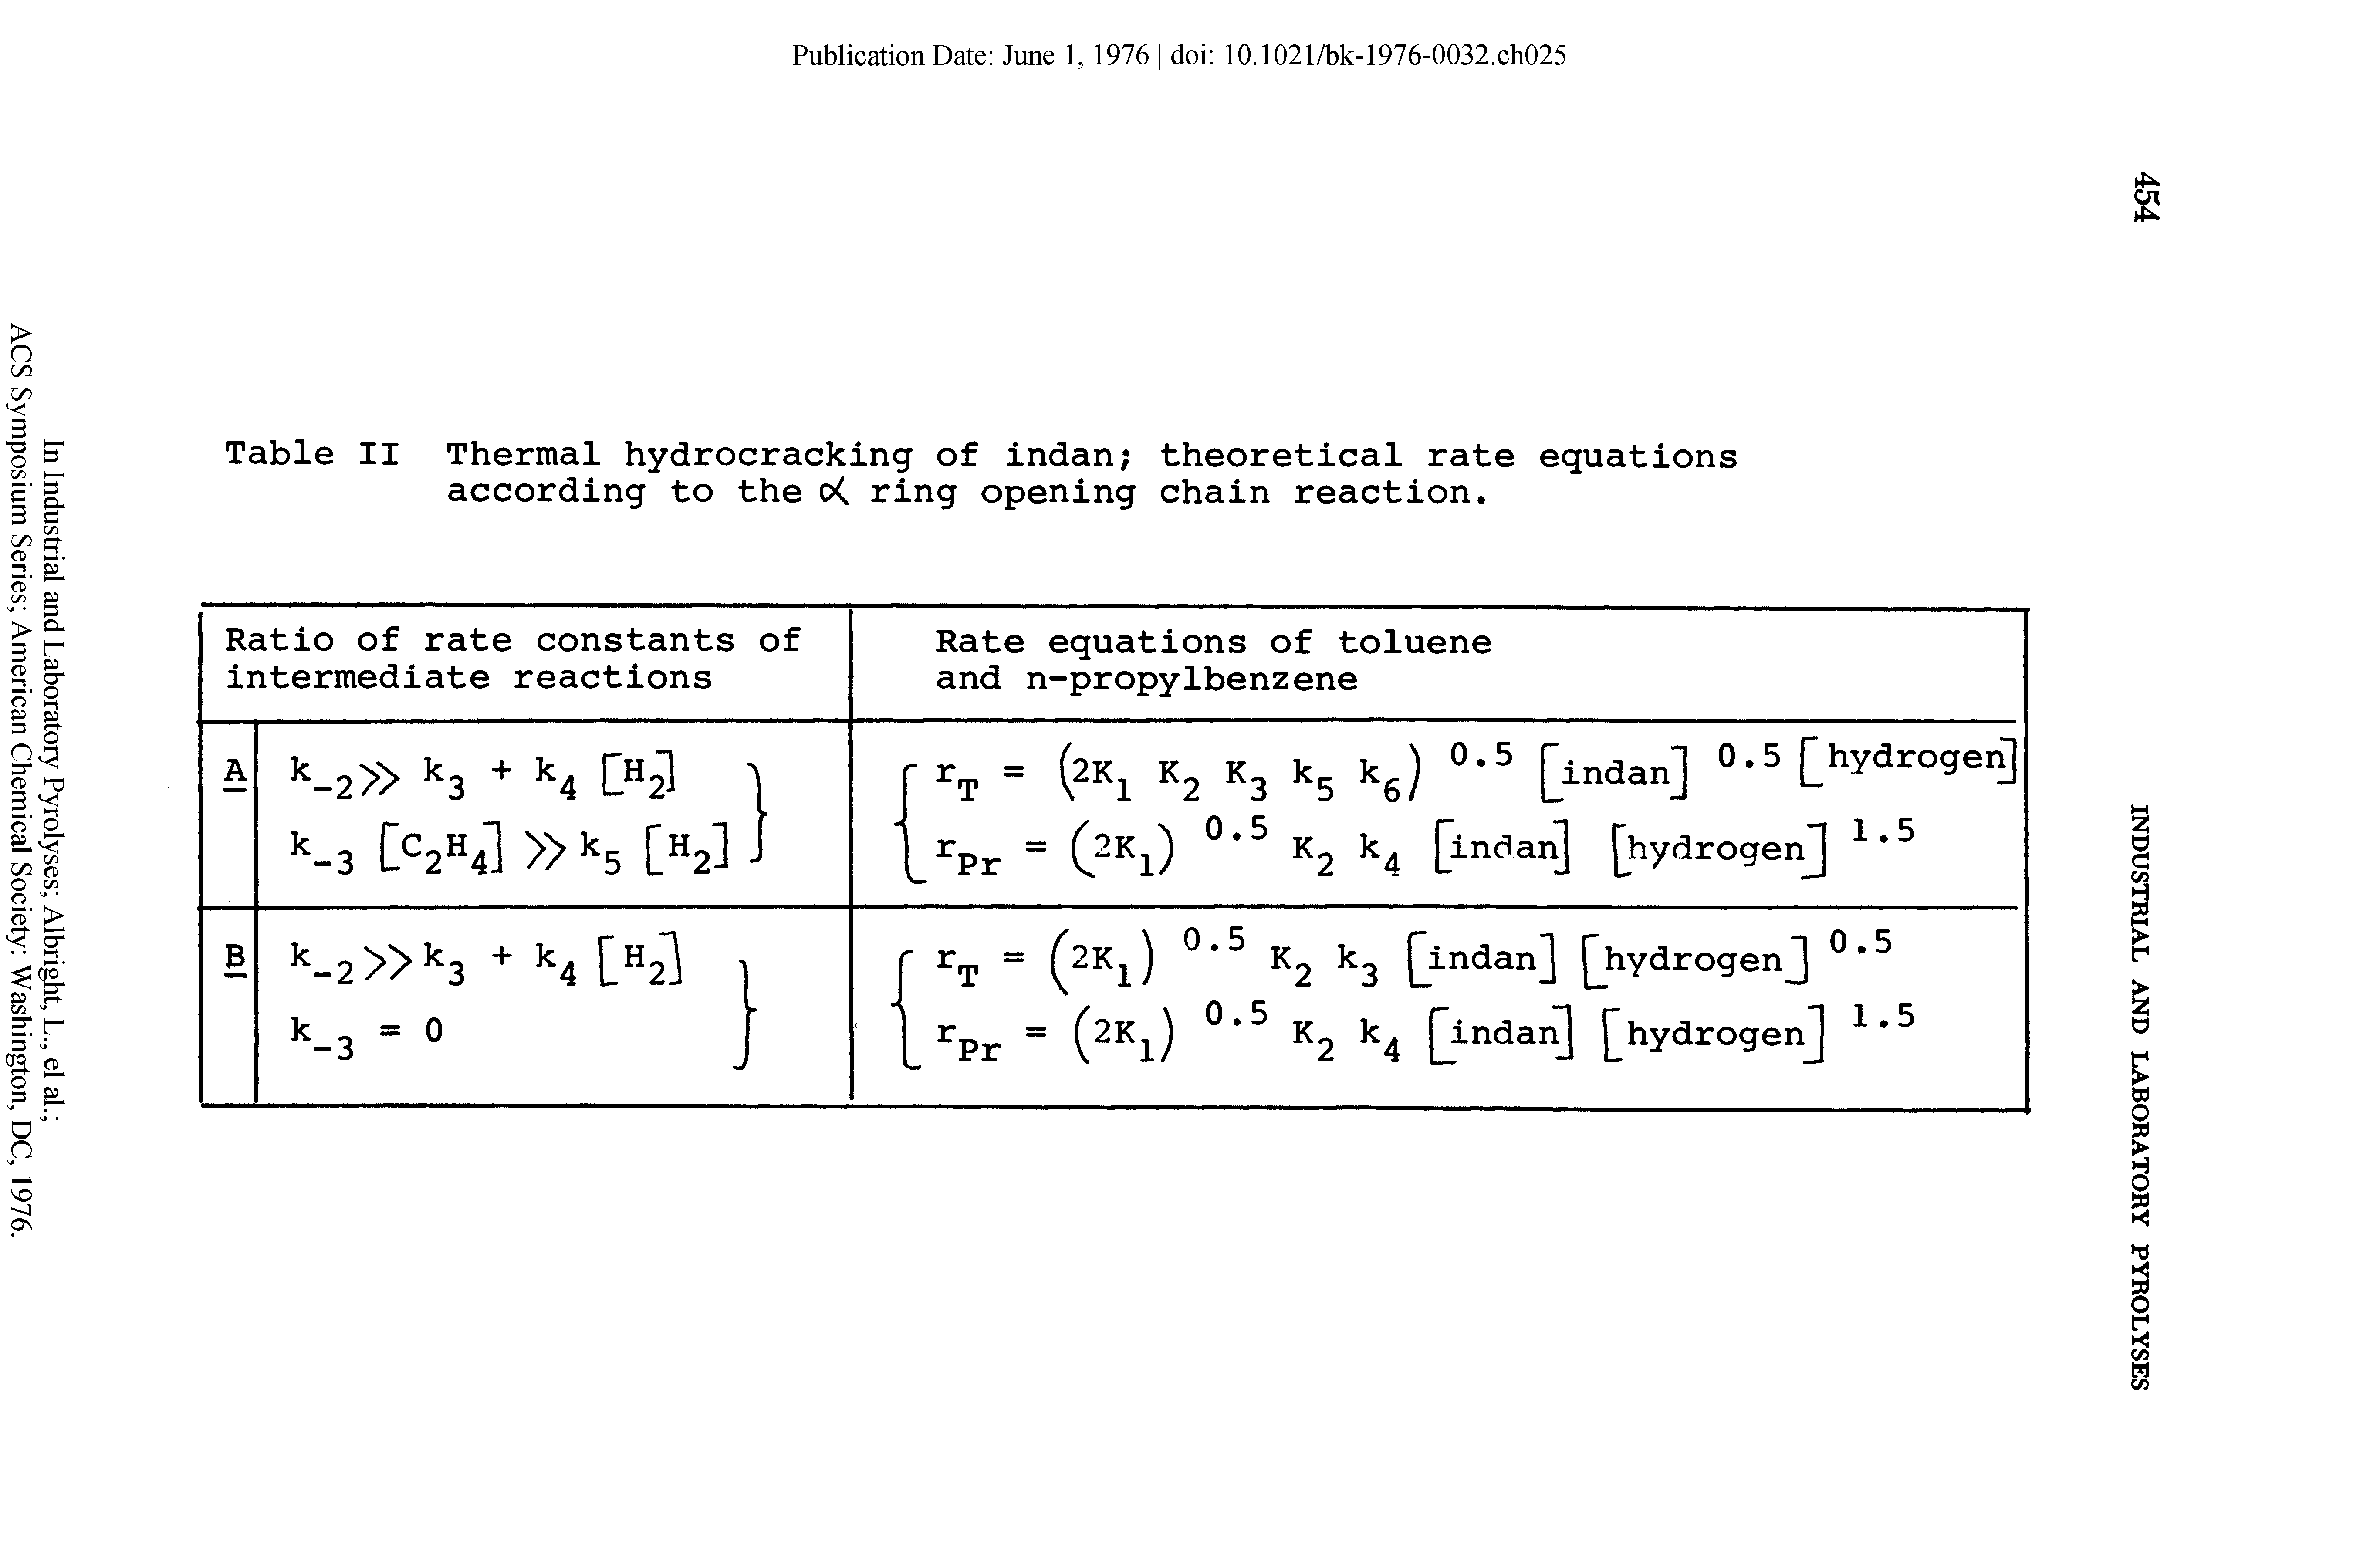 Table II Thermal hydrocracking of indan theoretical rate equations according to the c< ring opening chain reaction.